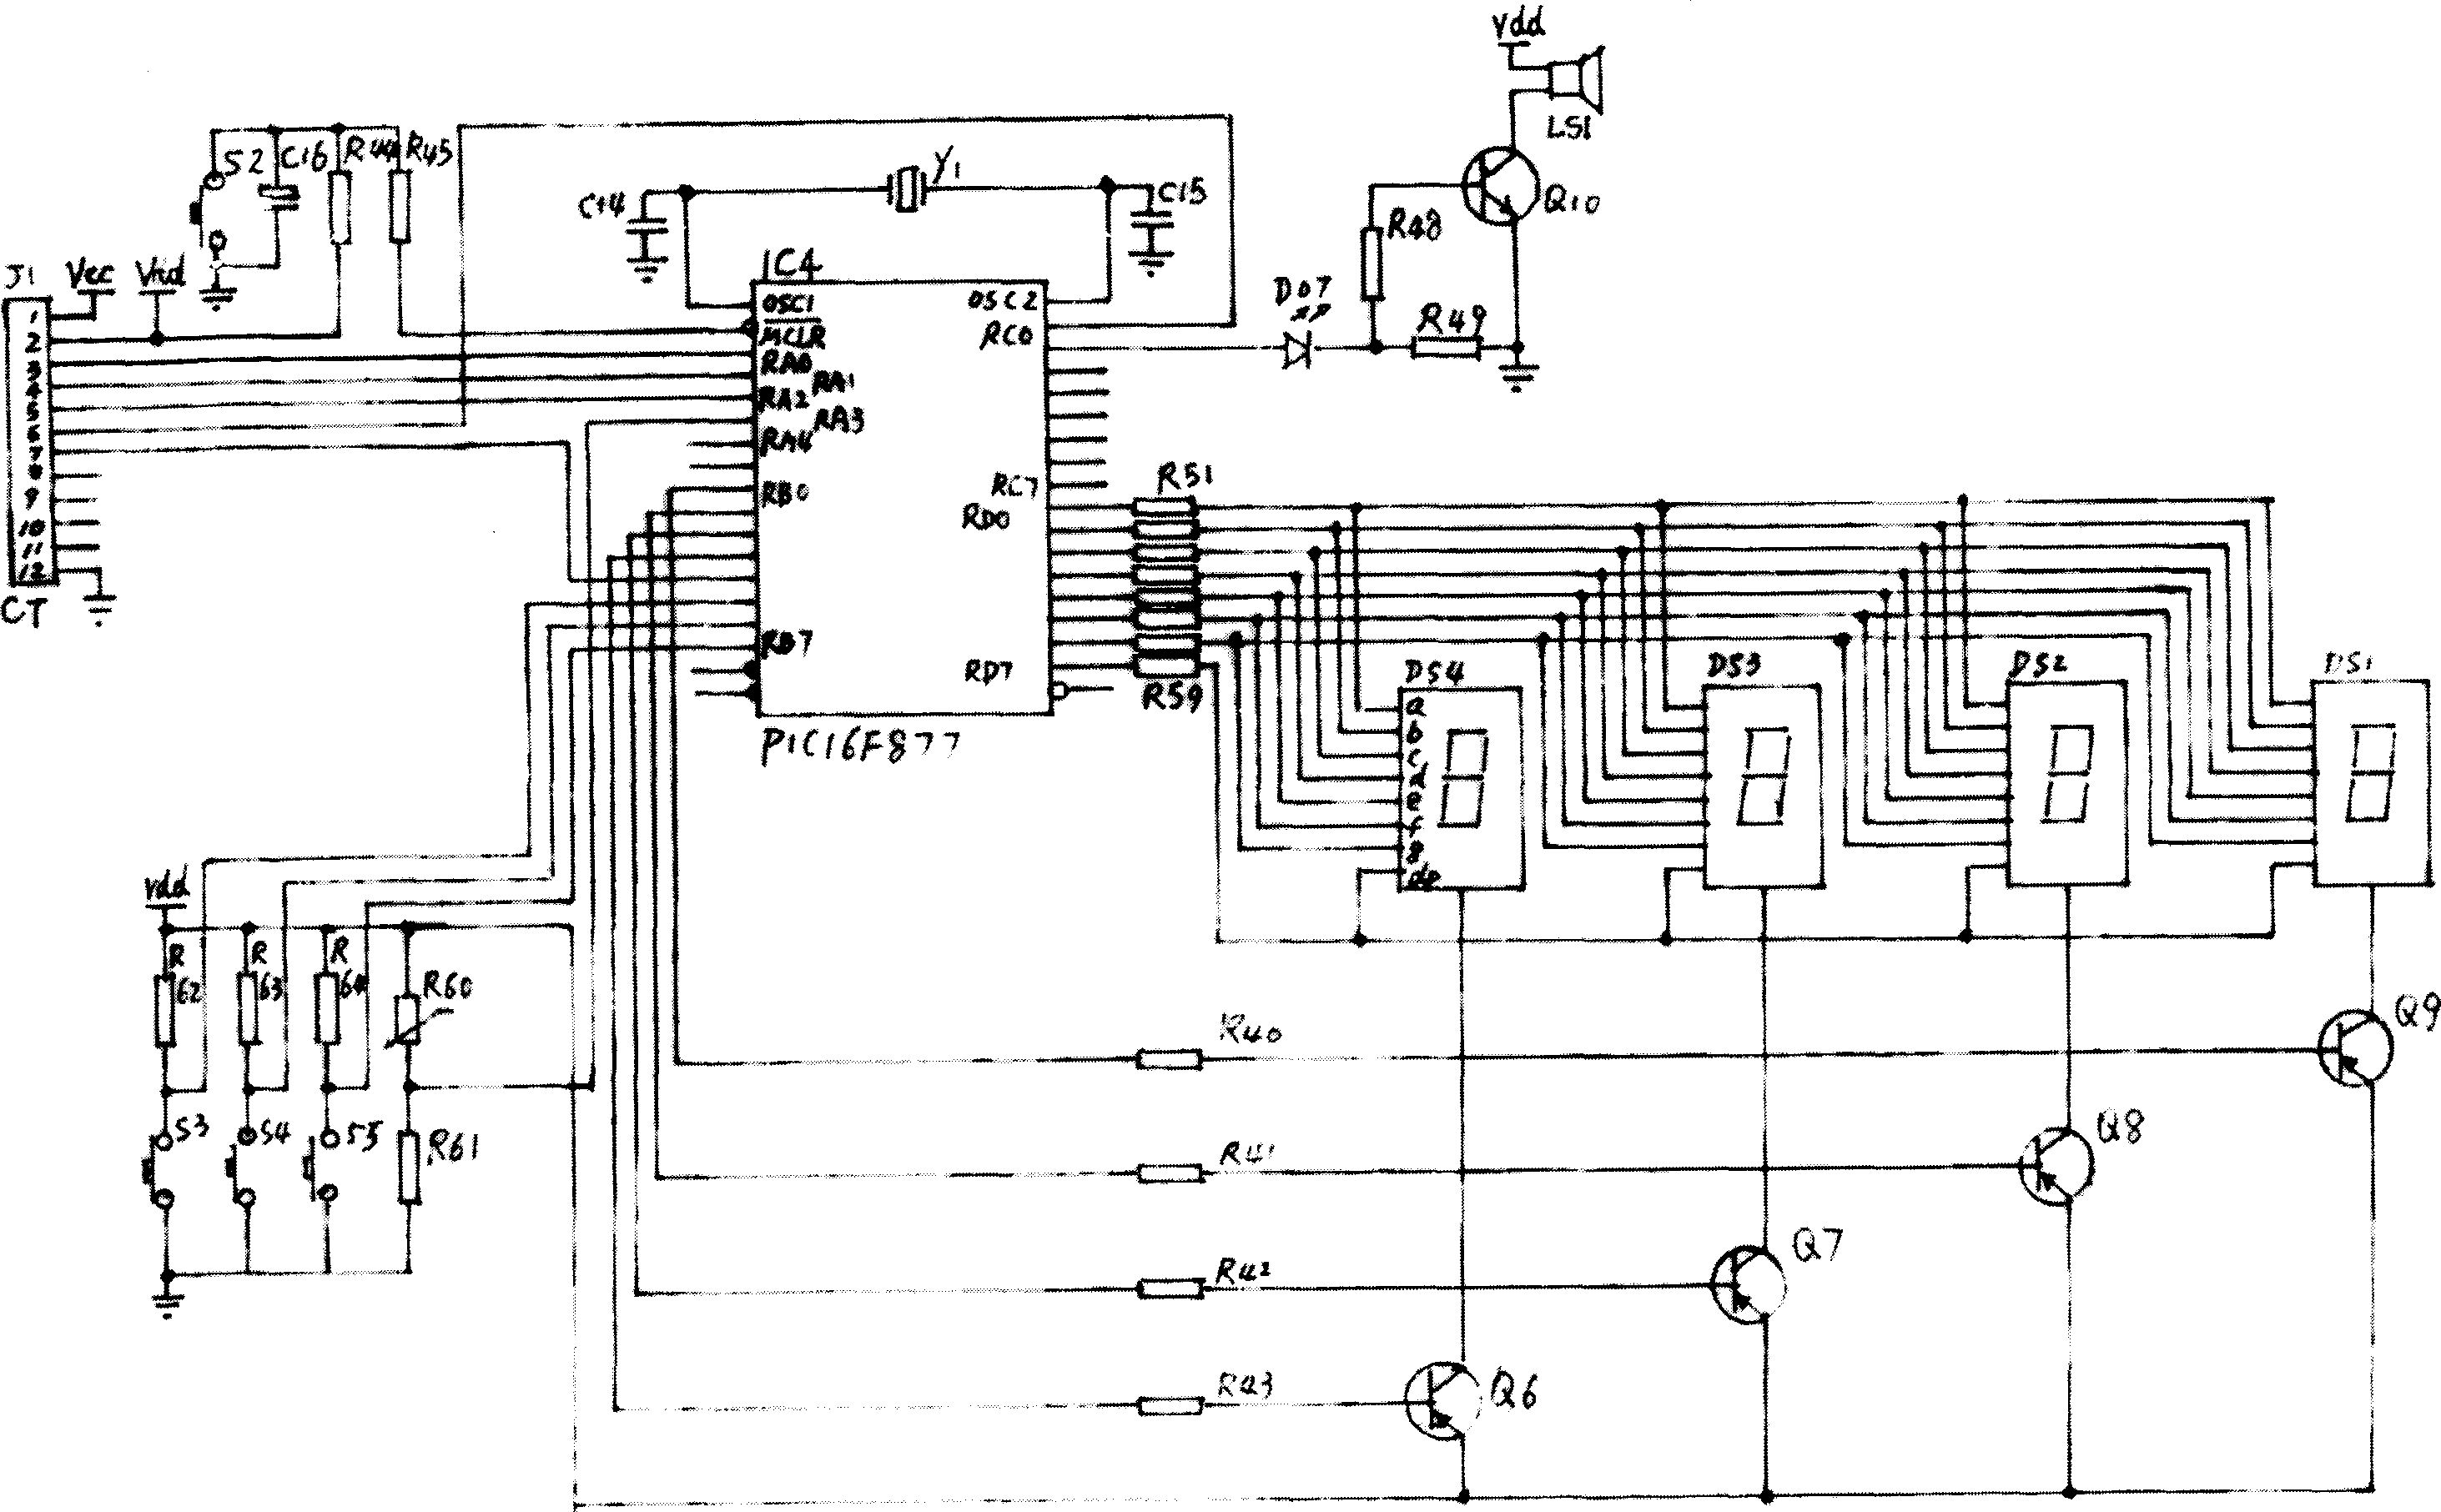 Integrated controller for meter and electrical appliance